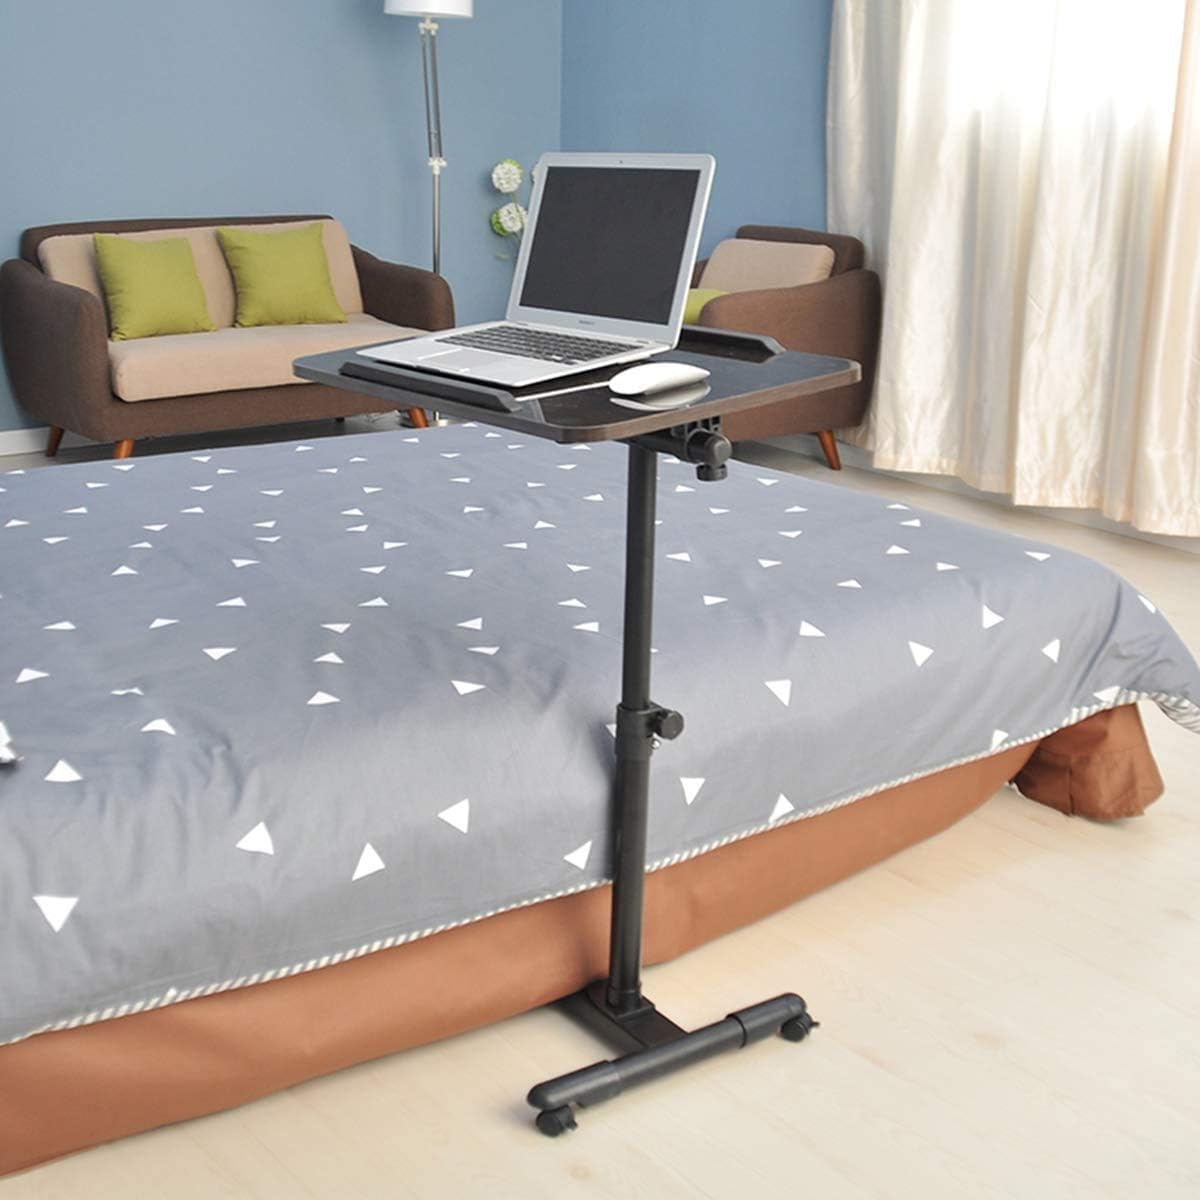 Adjustable Portable Lazy Breakfast Sofa Bed Laptop Computer Table Desk Stand